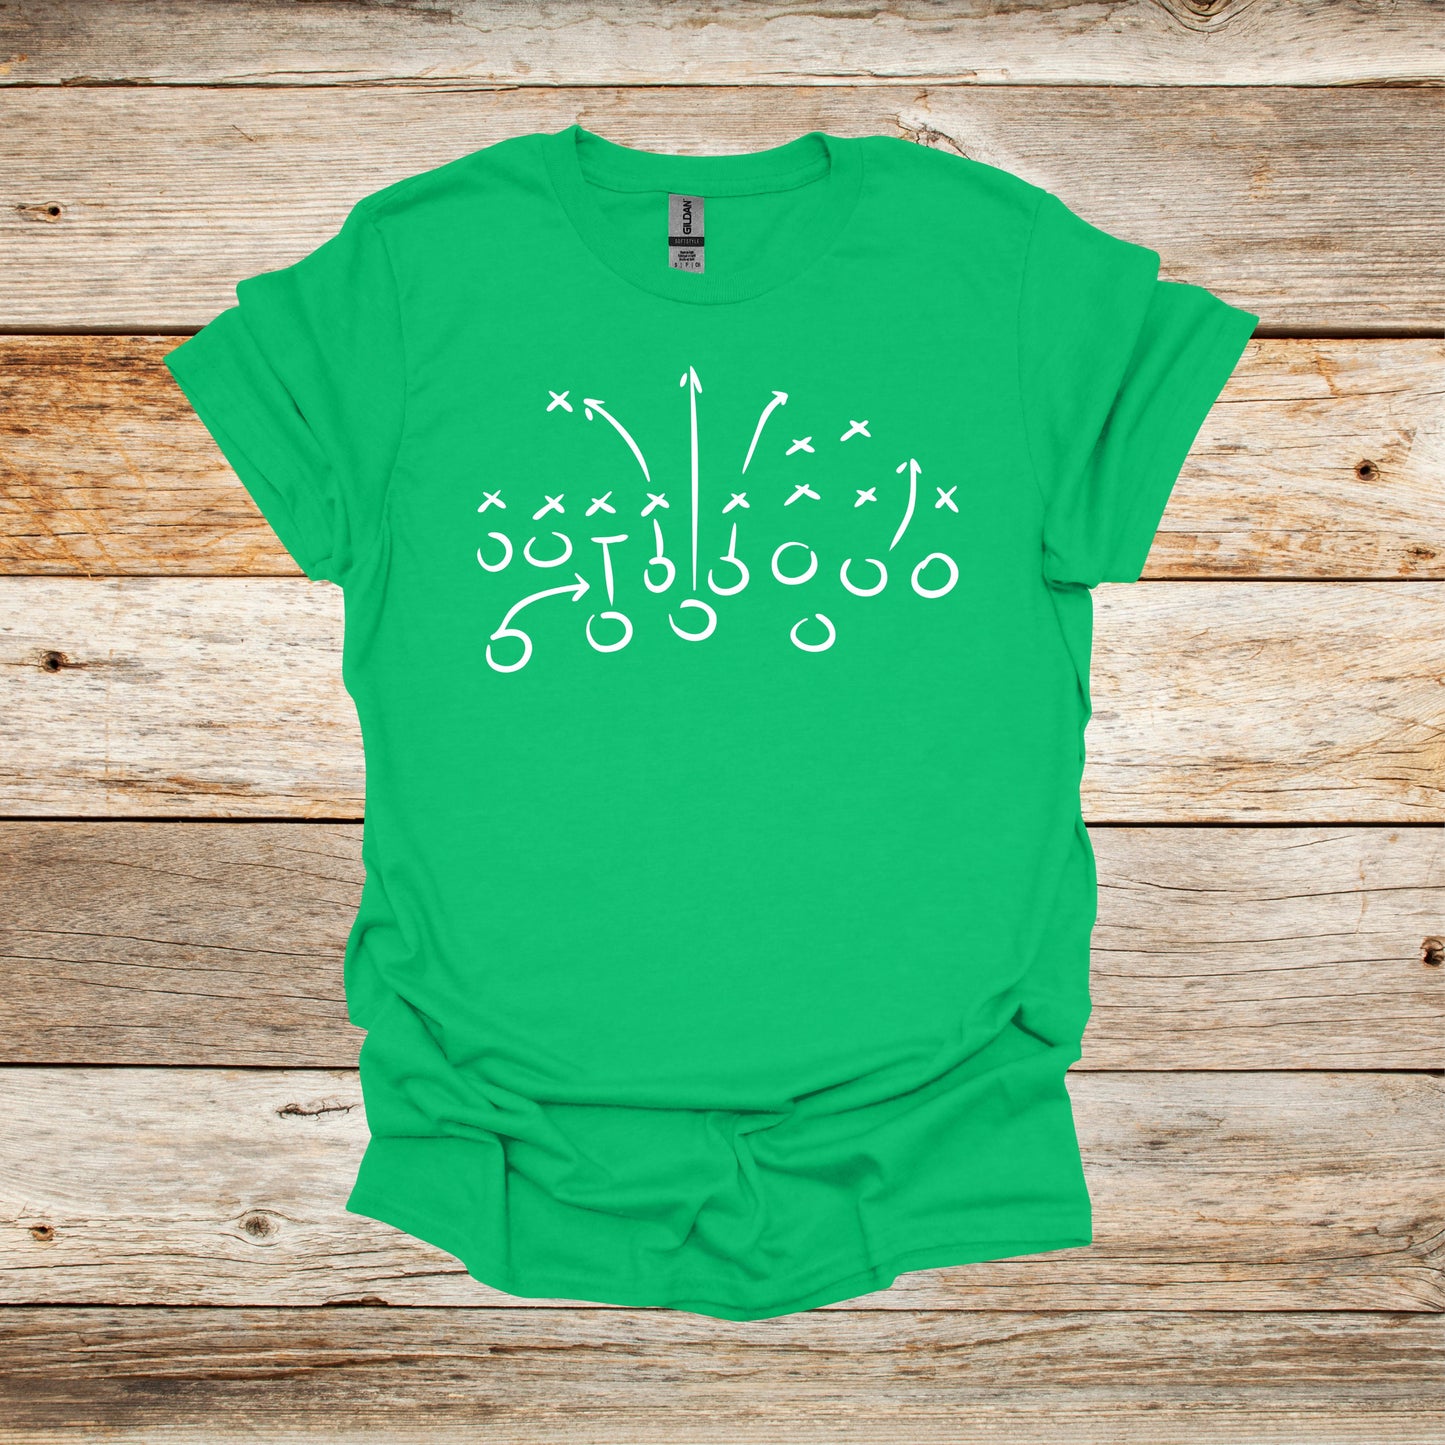 Football T-Shirt - Playbook - Adult and Children's Tee Shirts - Sports T-Shirts Graphic Avenue Irish Green Adult Small 